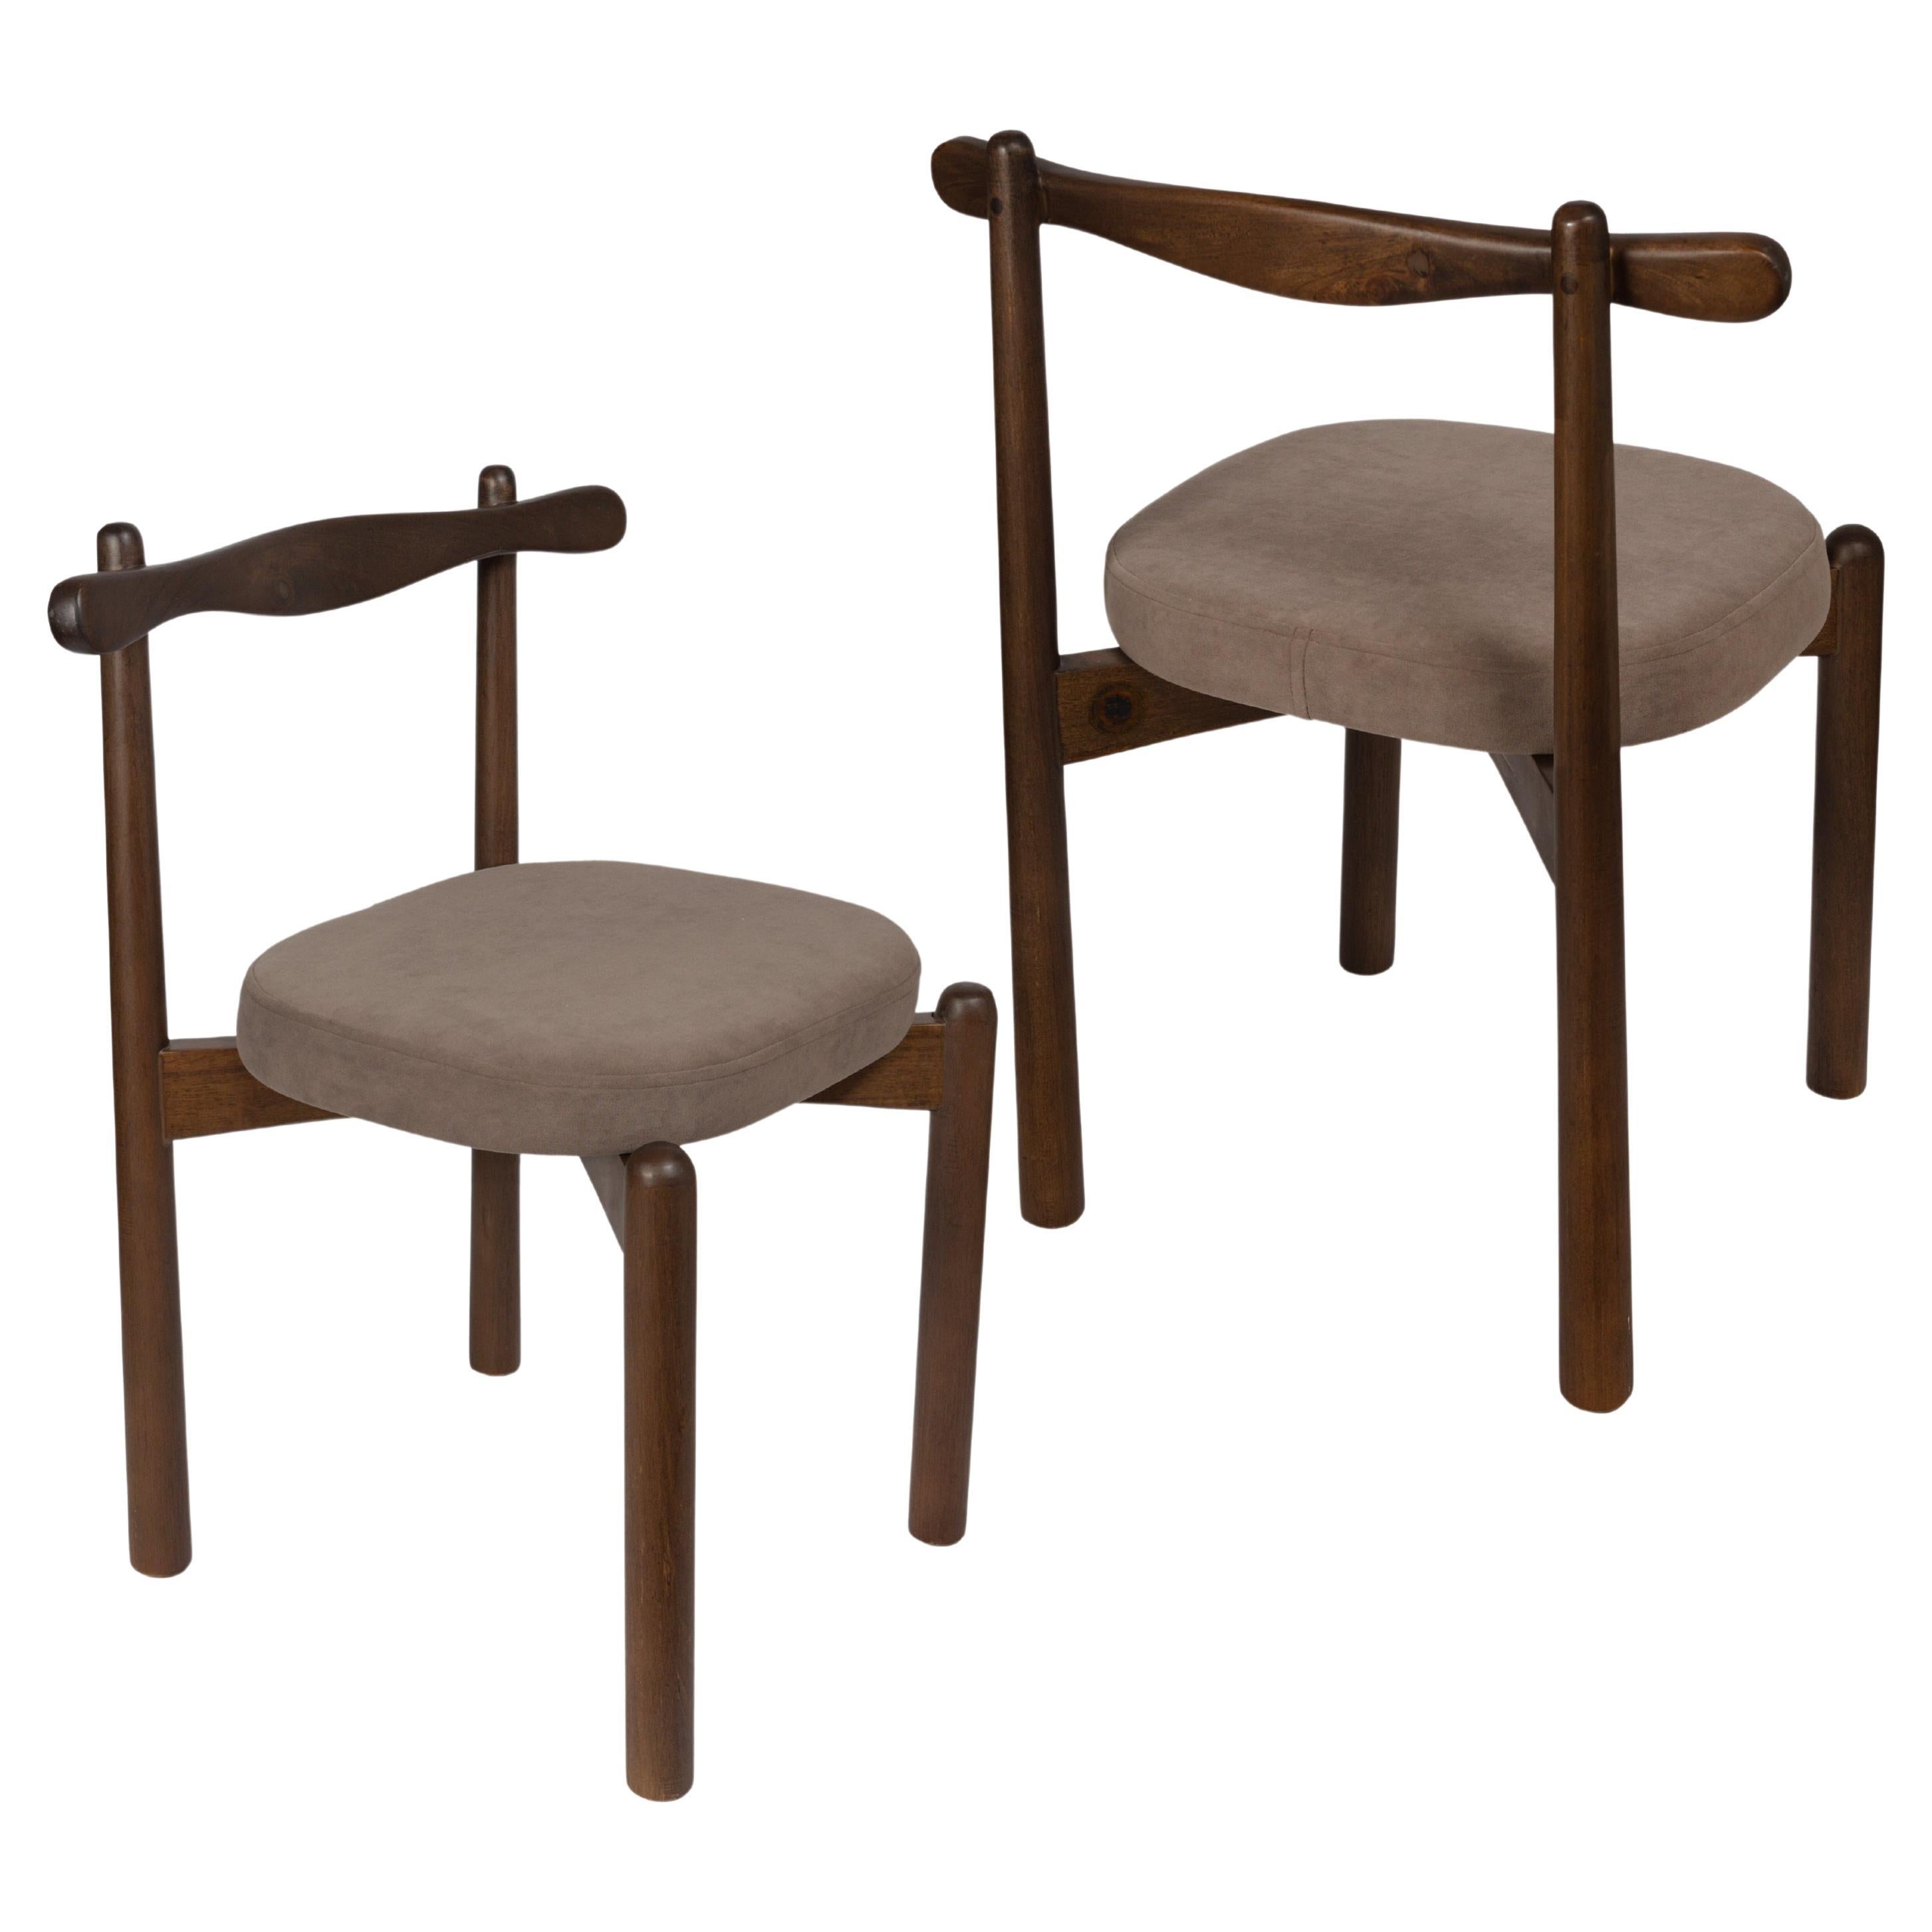 Set of 2 Dining Chairs Uçá Light Brown Wood (fabric ref : F20)